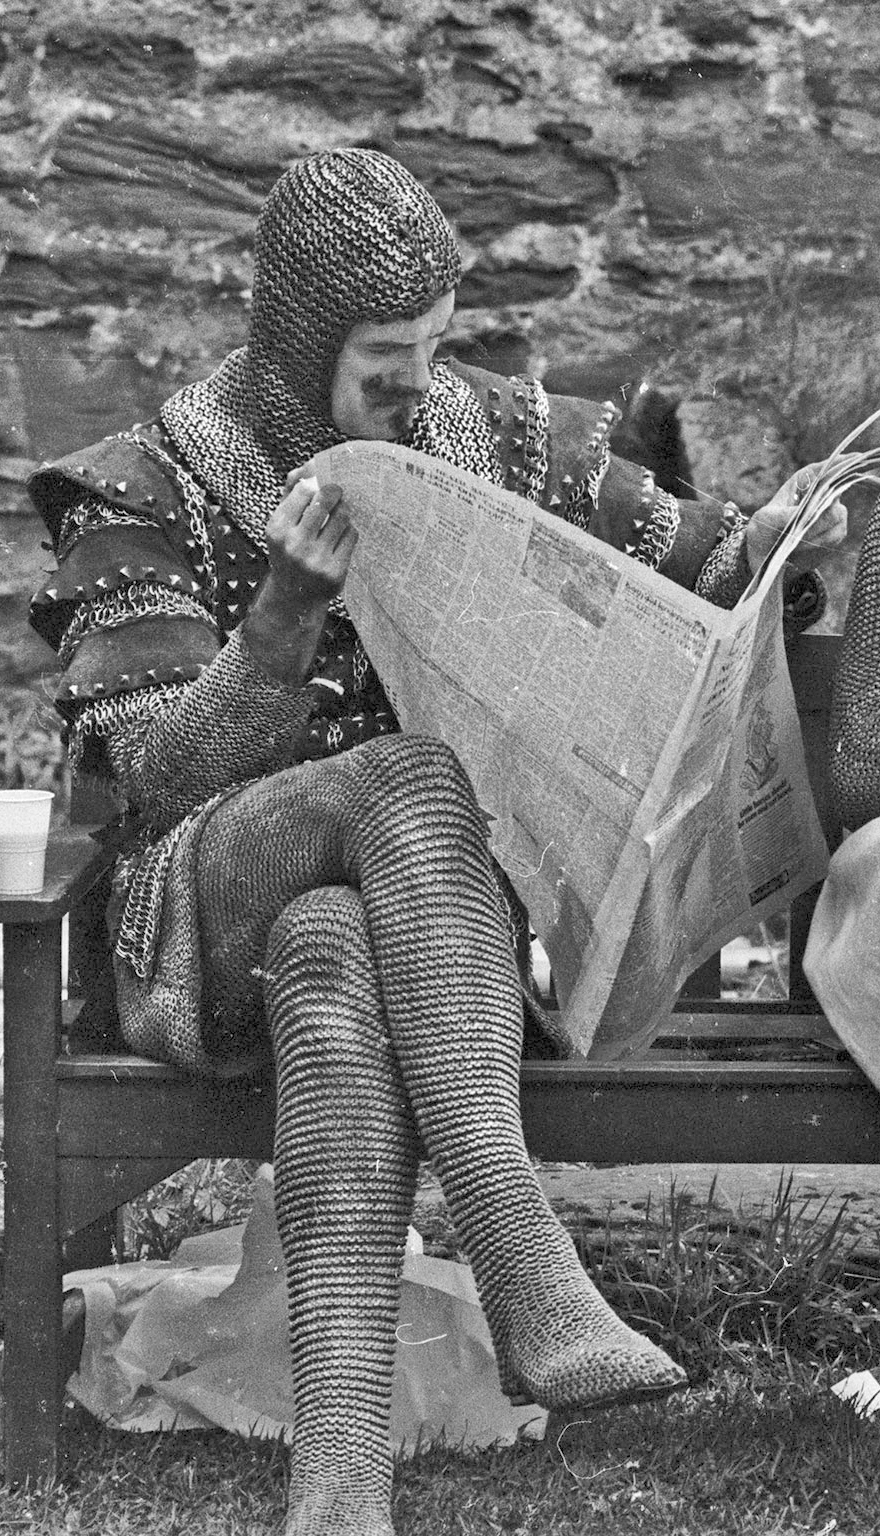 John Cleese taking a break on the set of Monty Python and The Holy Grail, 1974.